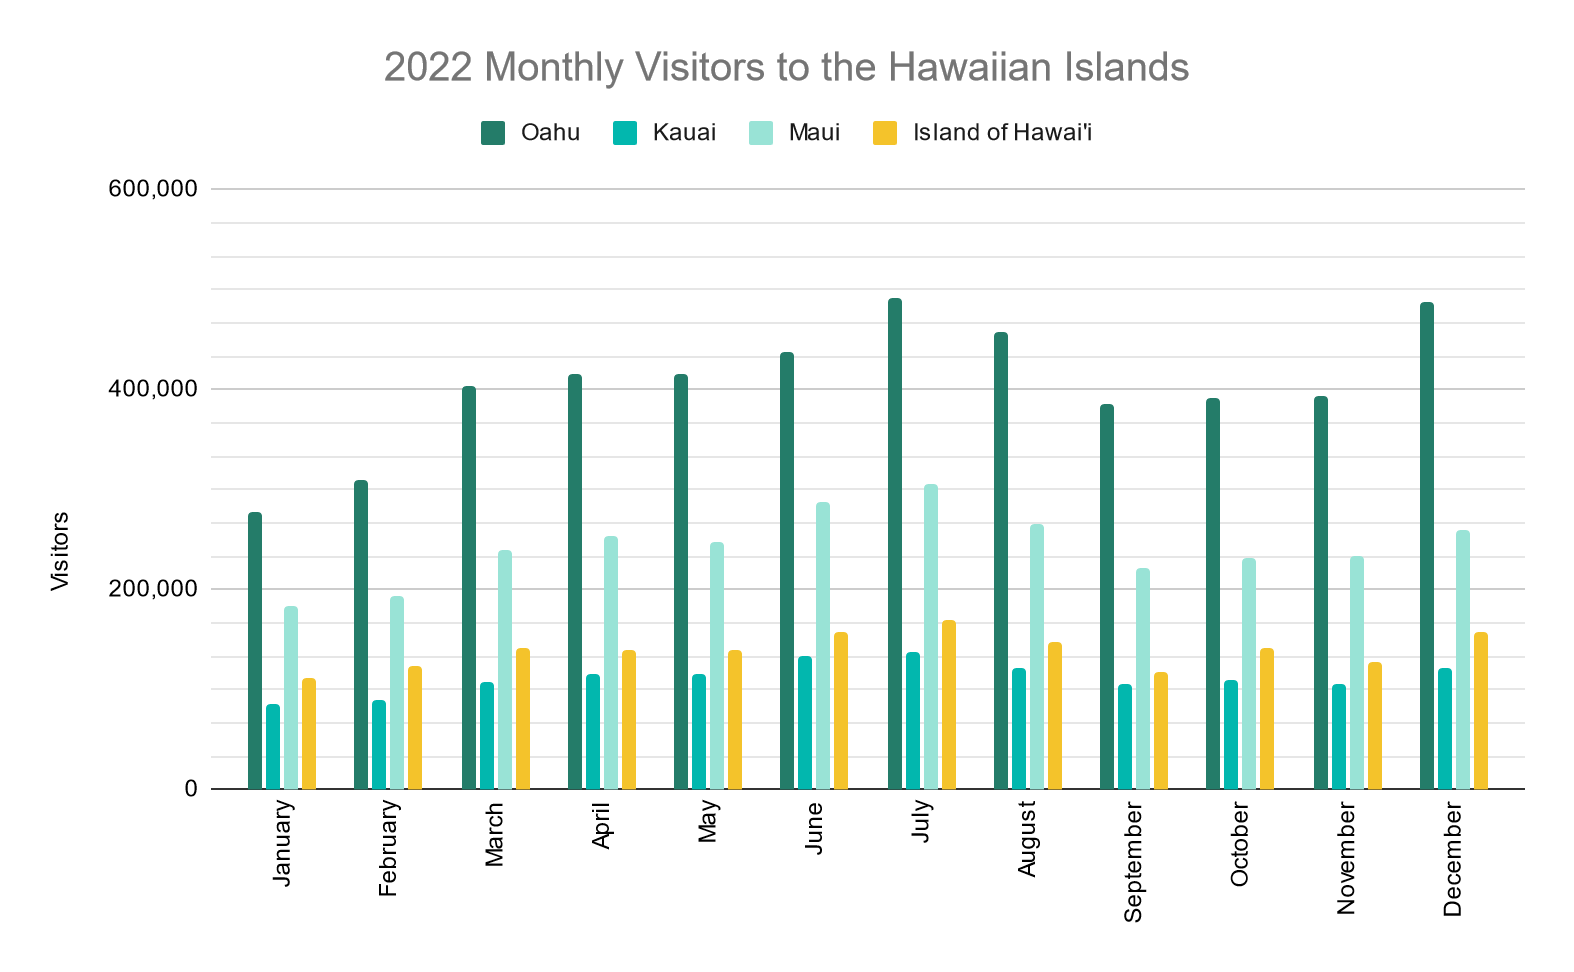 Graph showing the monthly visitors by island in 2022. Oahu consistently has the most, and Kauai and the Big Island consistently have the least (by hundreds of thousands).